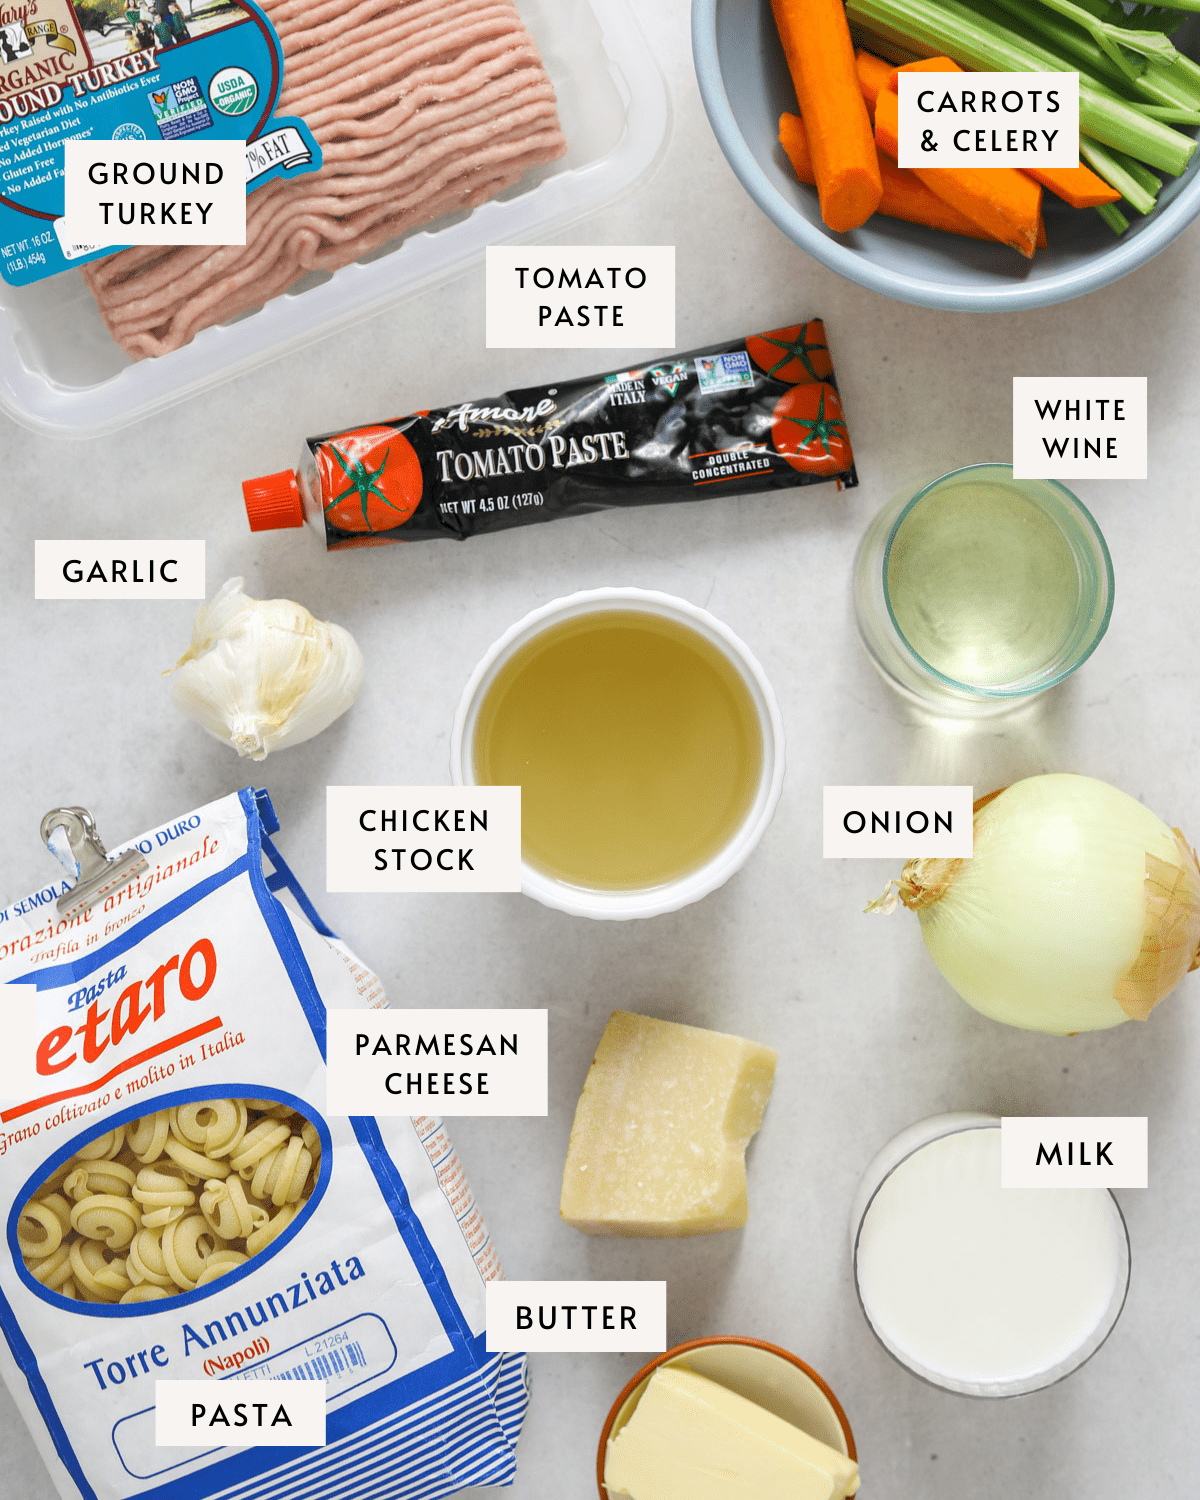 recipe ingredients individually portioned and labeled; a white onion, a bowl of chicken stock, a bag of pasta, ground turkey, carrots and celery in a bowl, butter, milk, garlic and tomato paste